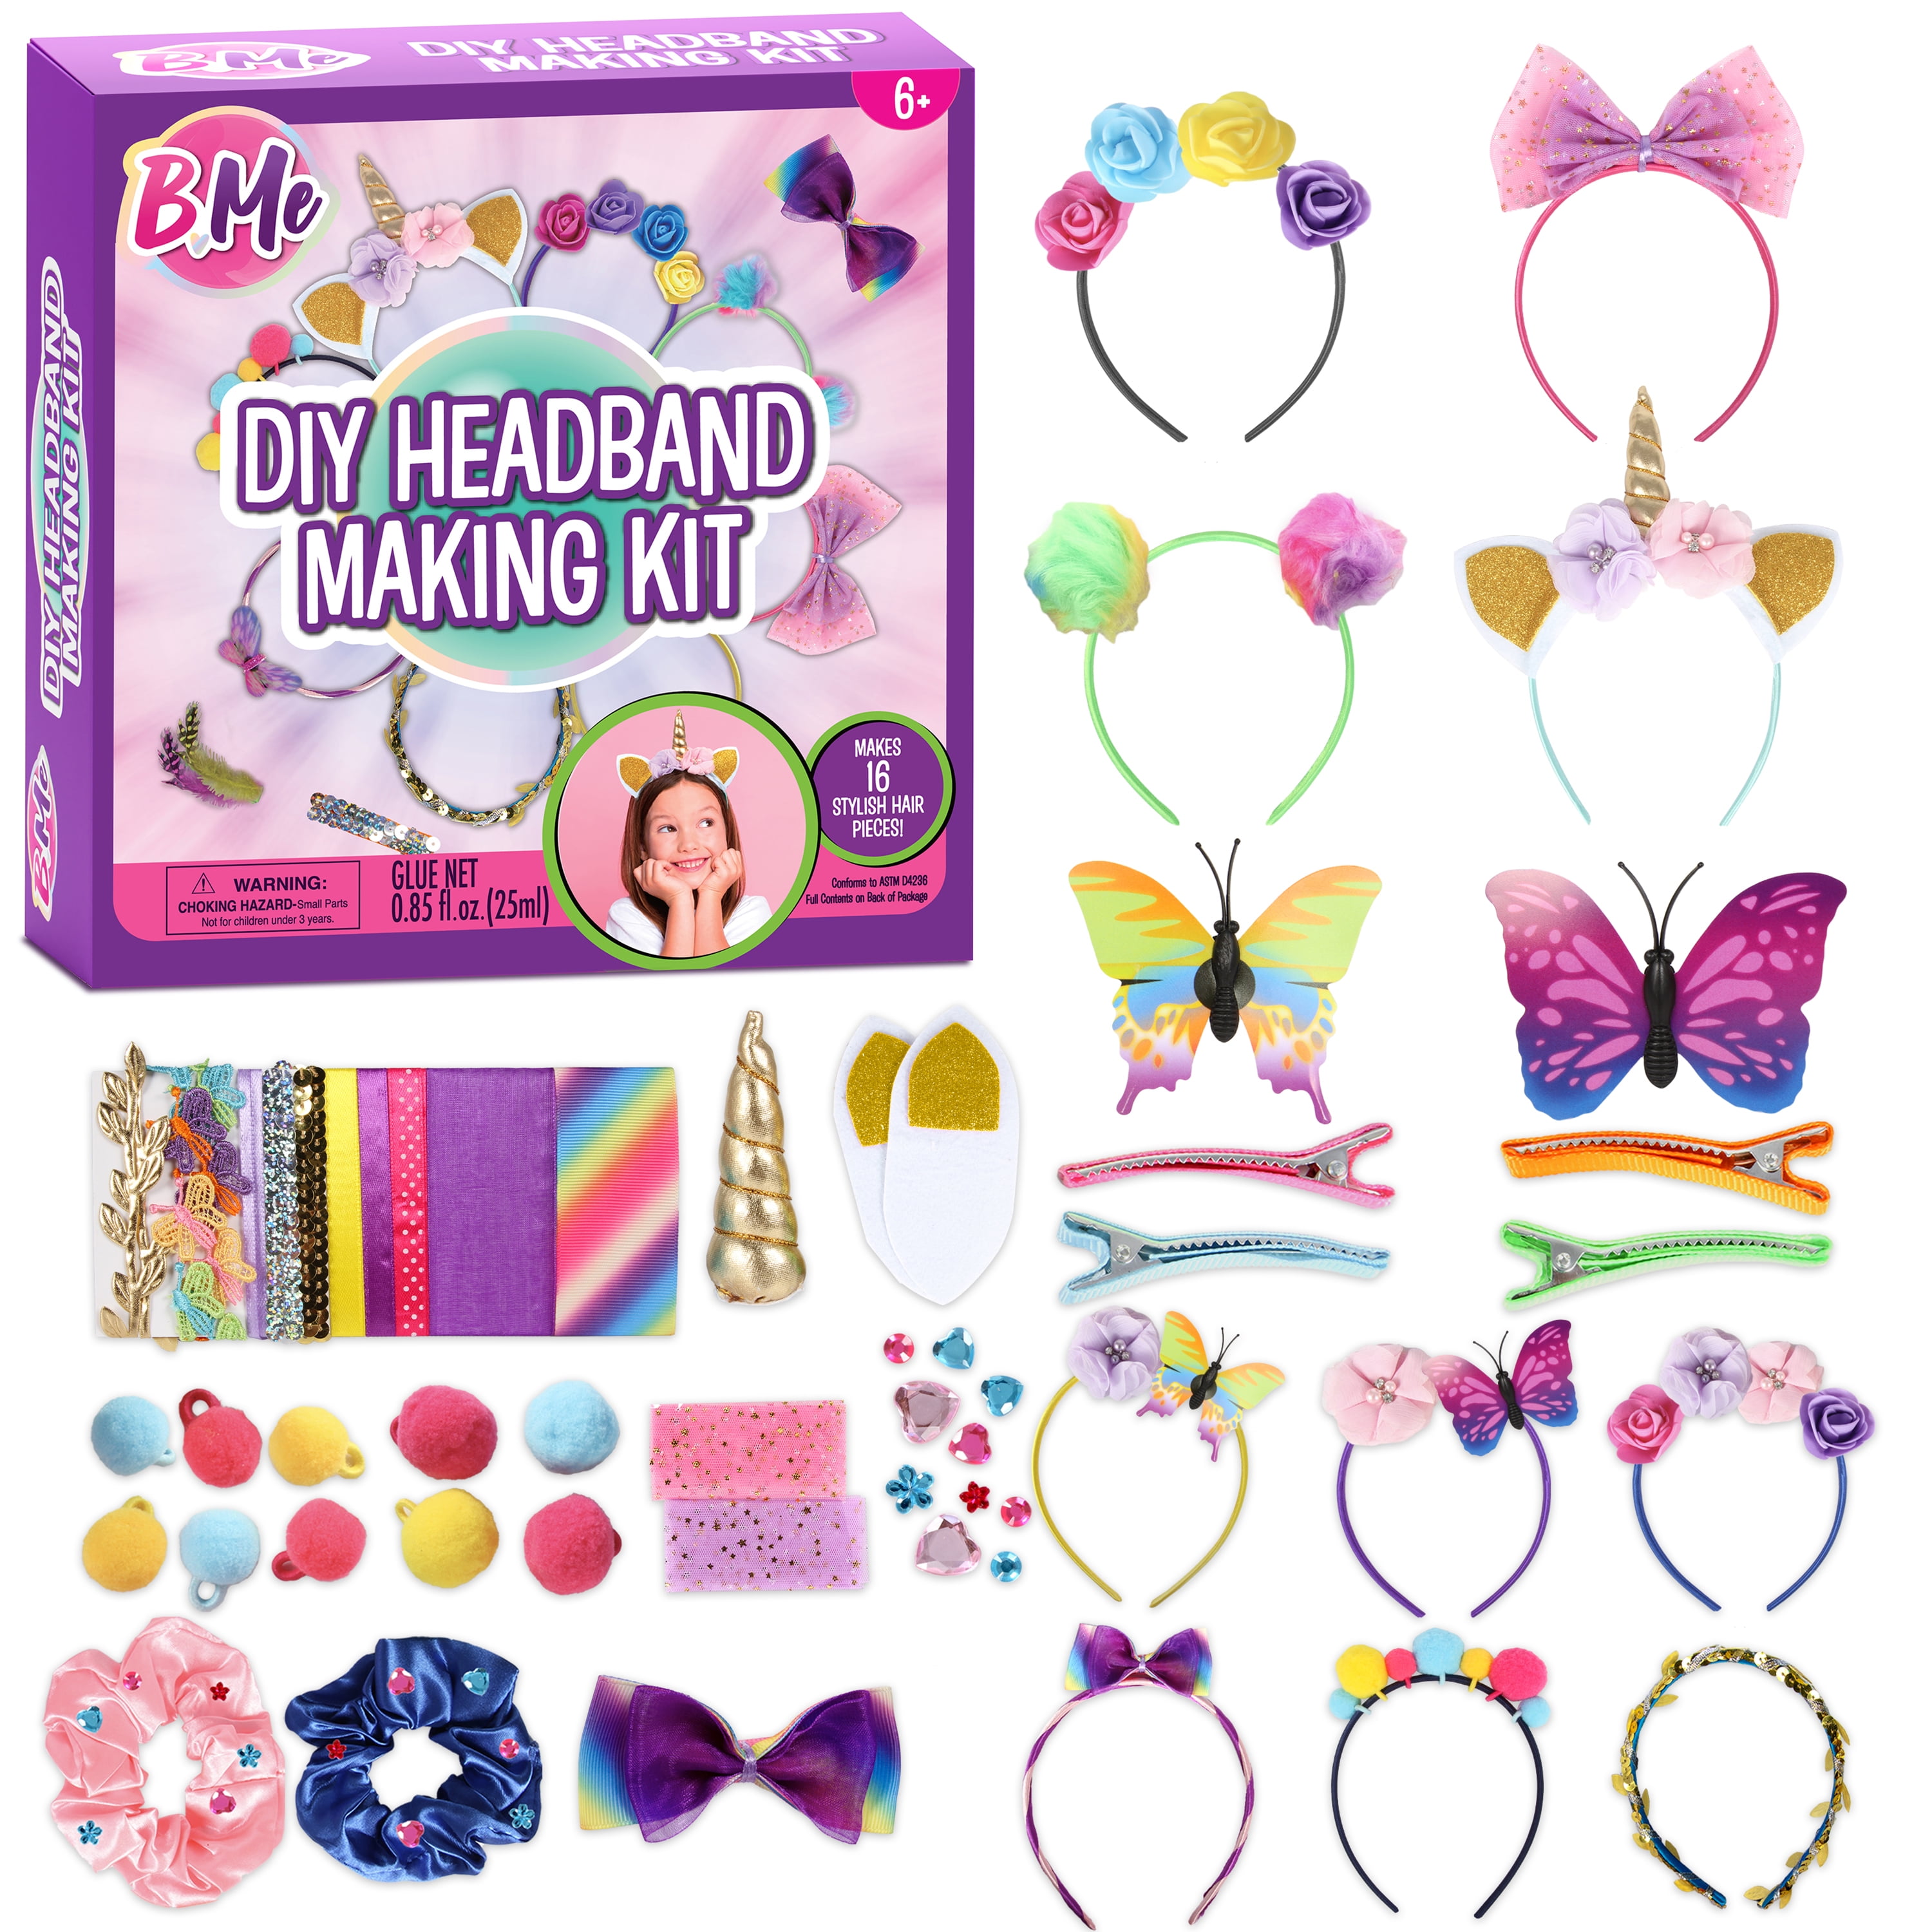  Headband Making Kit for Girls - Make Your Own Fashion Headbands  - Hair Accessories Girls Crafts Ages 5-7 - DIY Arts and Crafts Gifts for 5  6 7+ Year Old Girls –